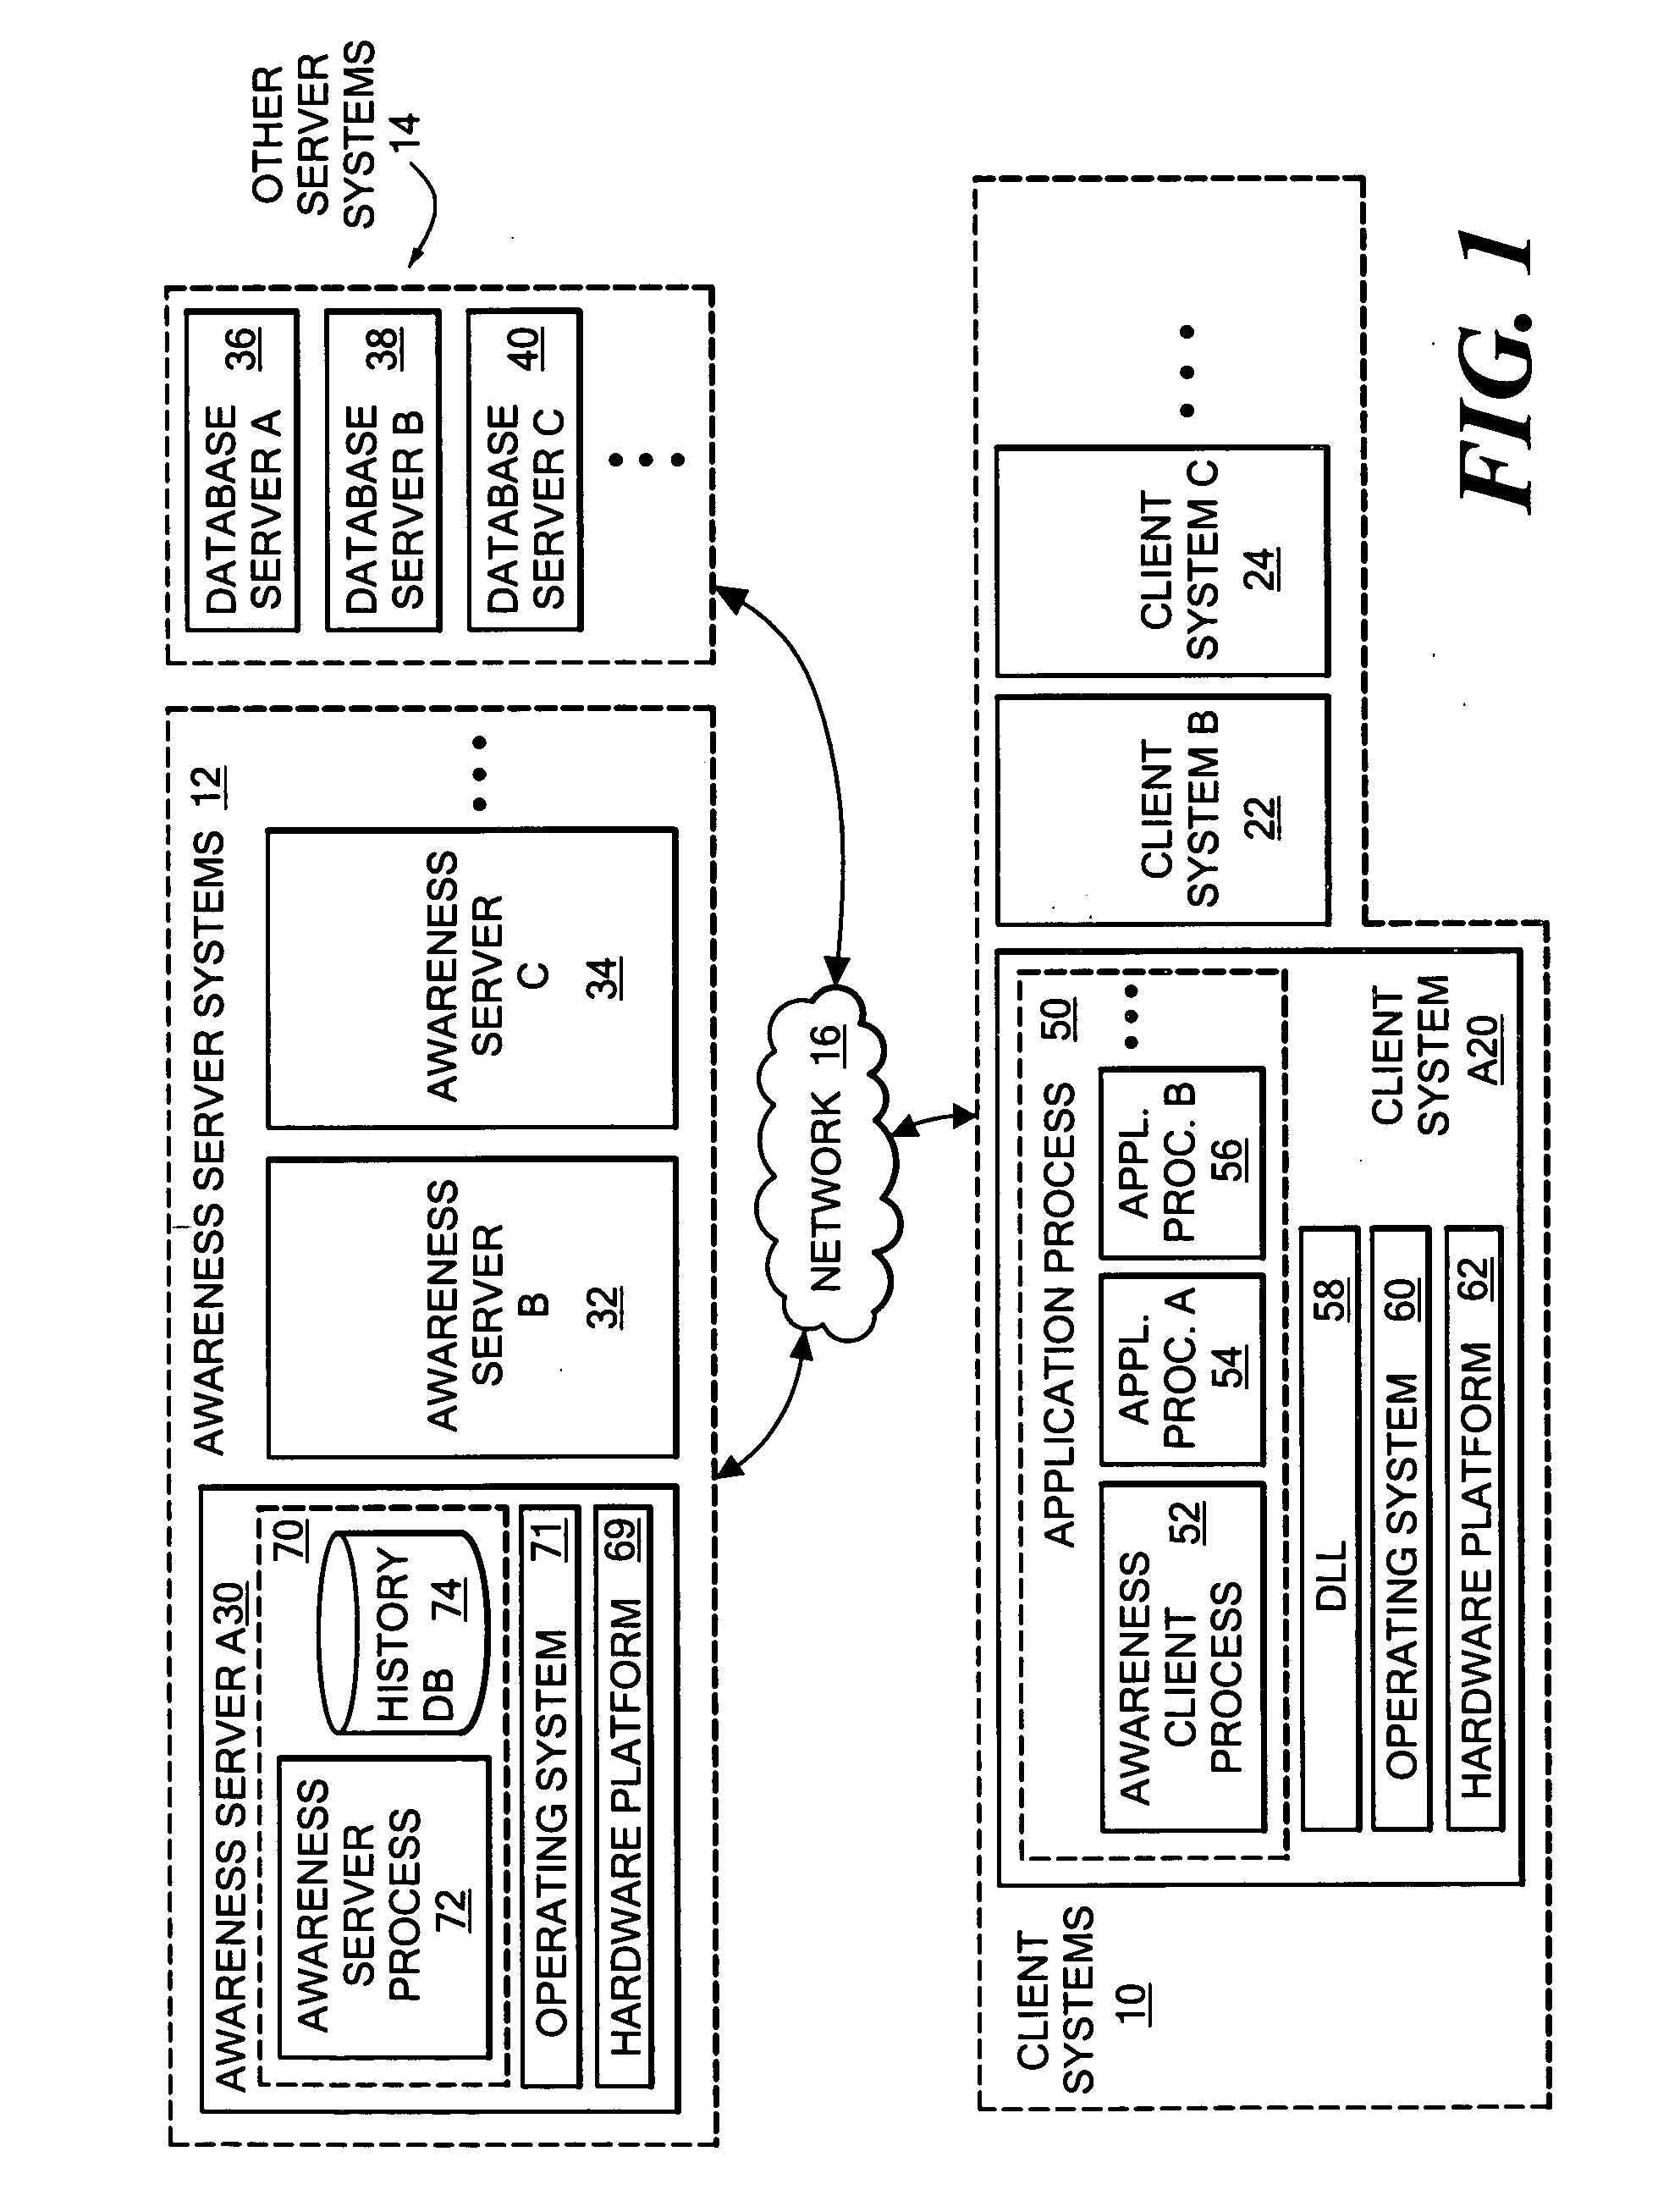 Method and system for sensing and communicating the use of communication modes by remote users